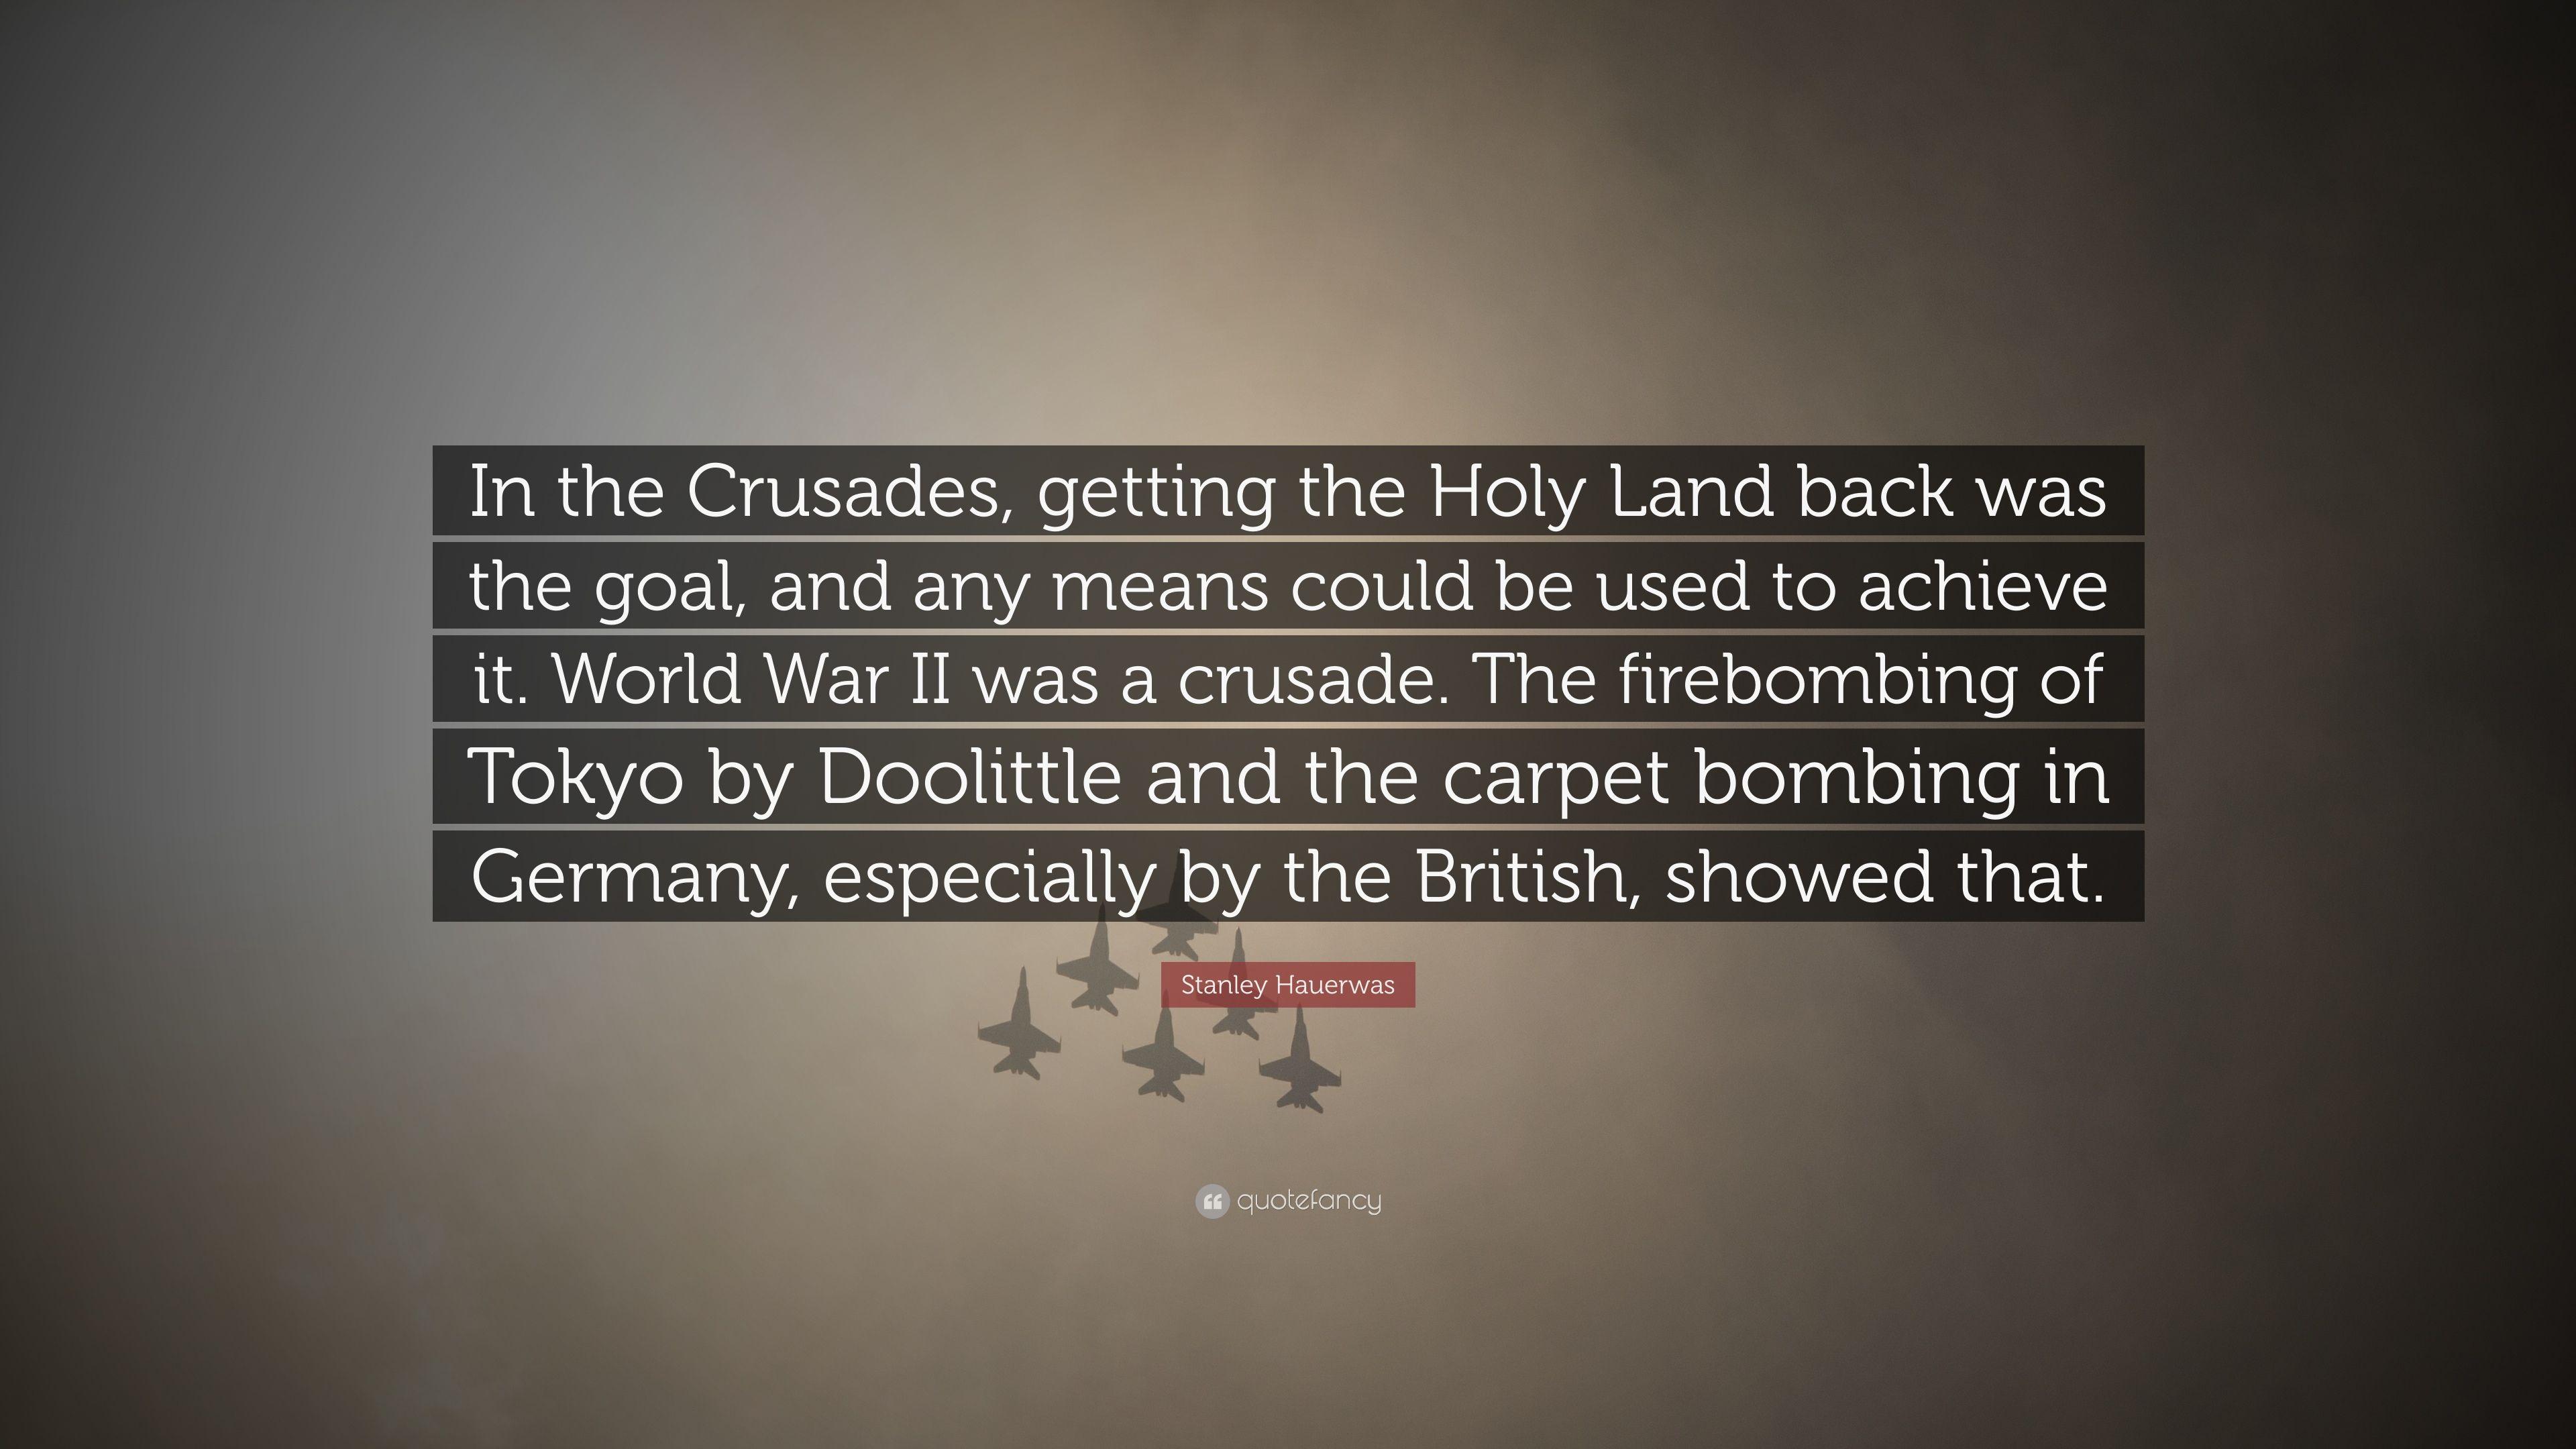 Stanley Hauerwas Quote: “In the Crusades, getting the Holy Land